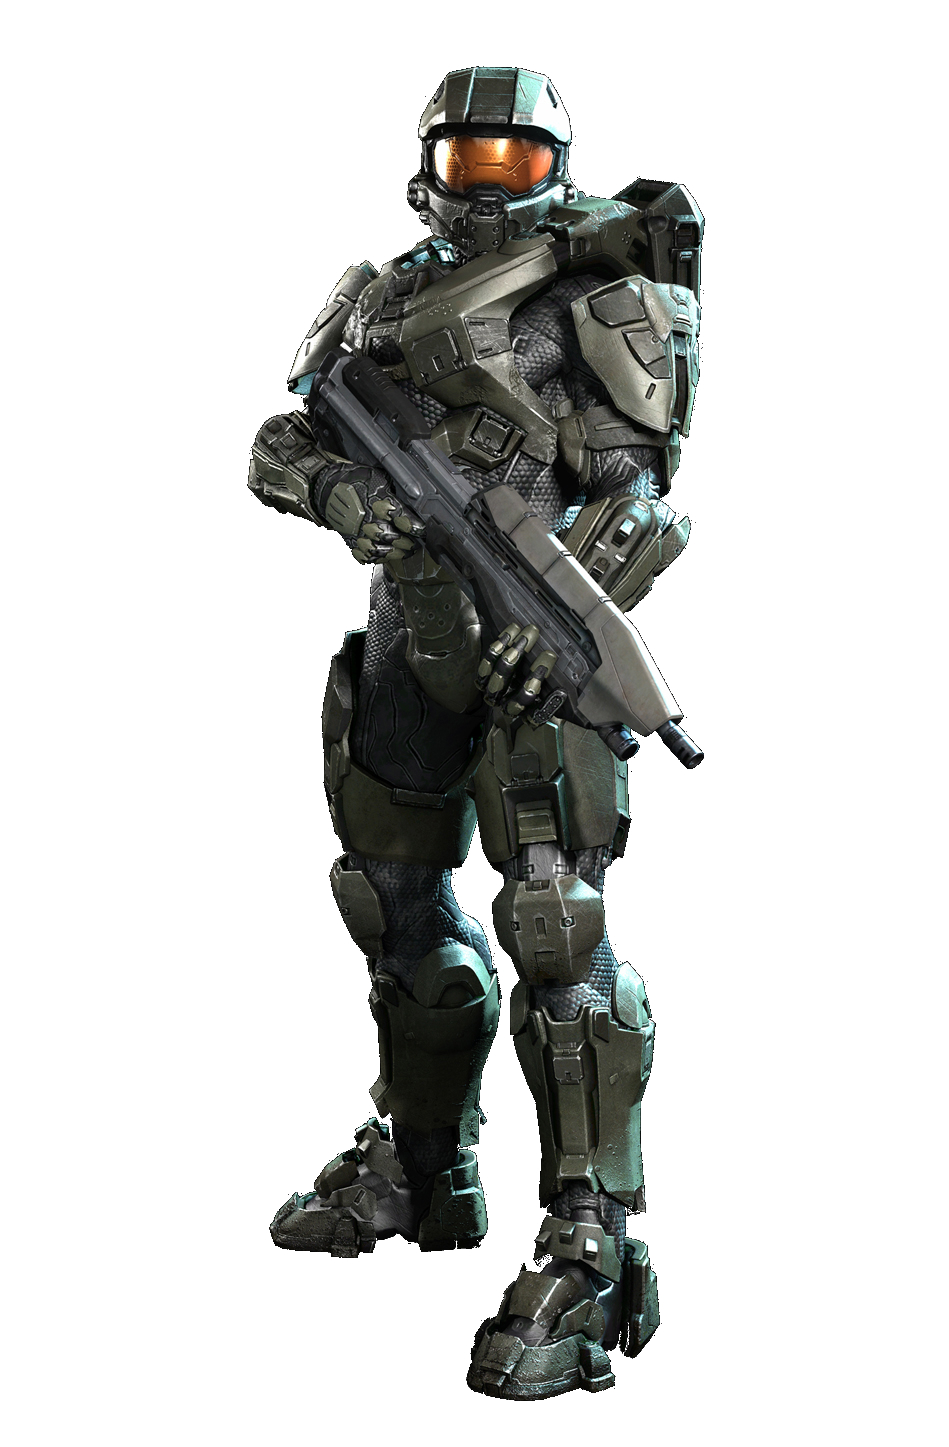 Image - John-117 in render with MA5D wielded down.png - Halo Nation ...